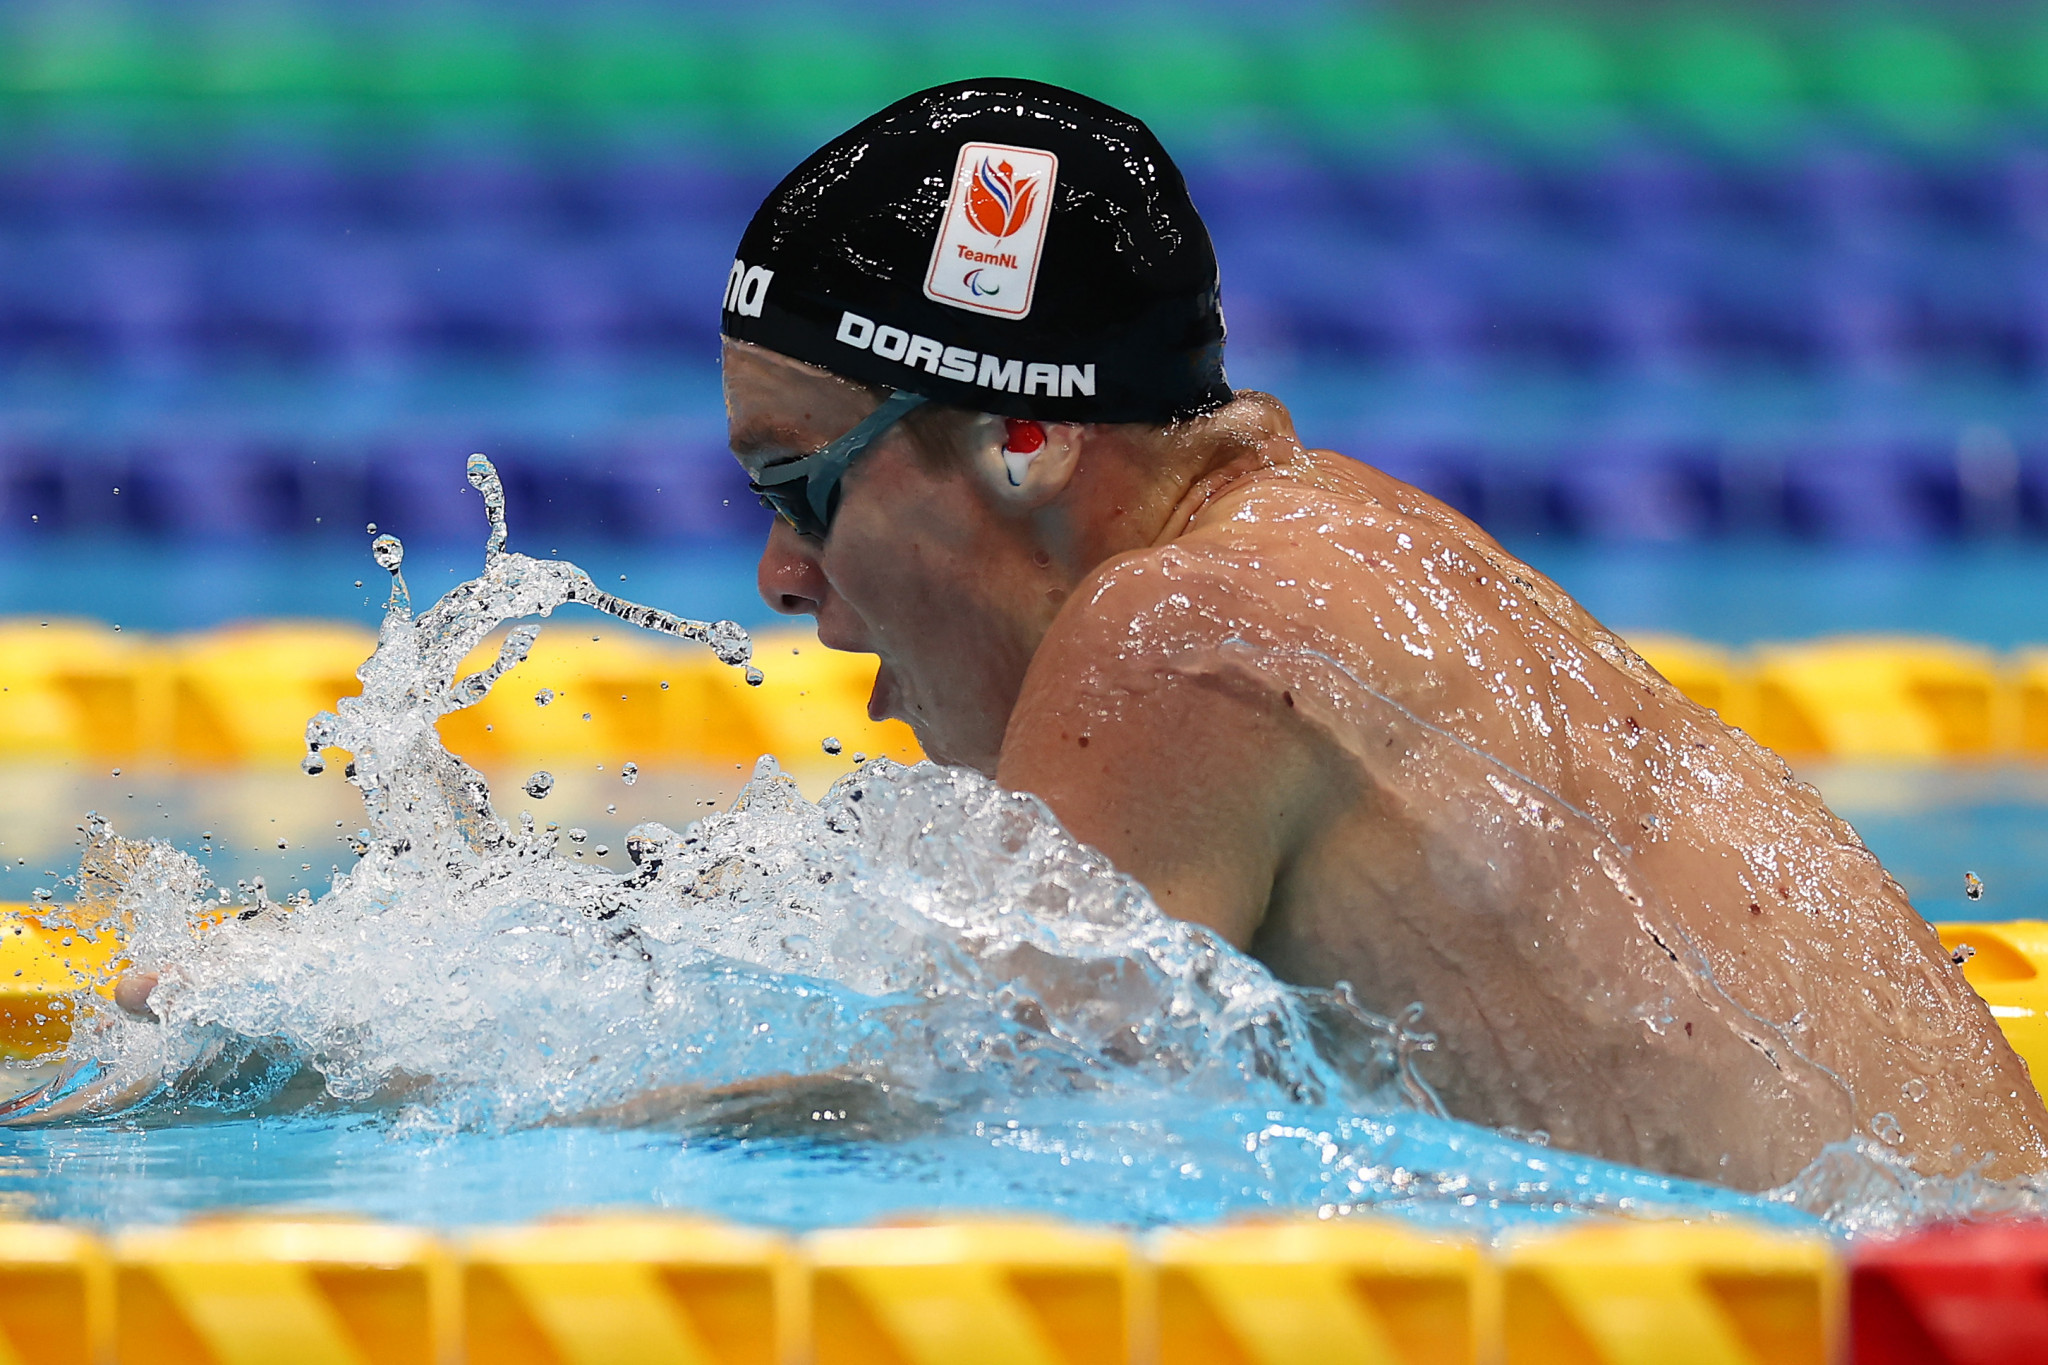 Berlin Para Swimming World Series leg ends in style with several world records broken